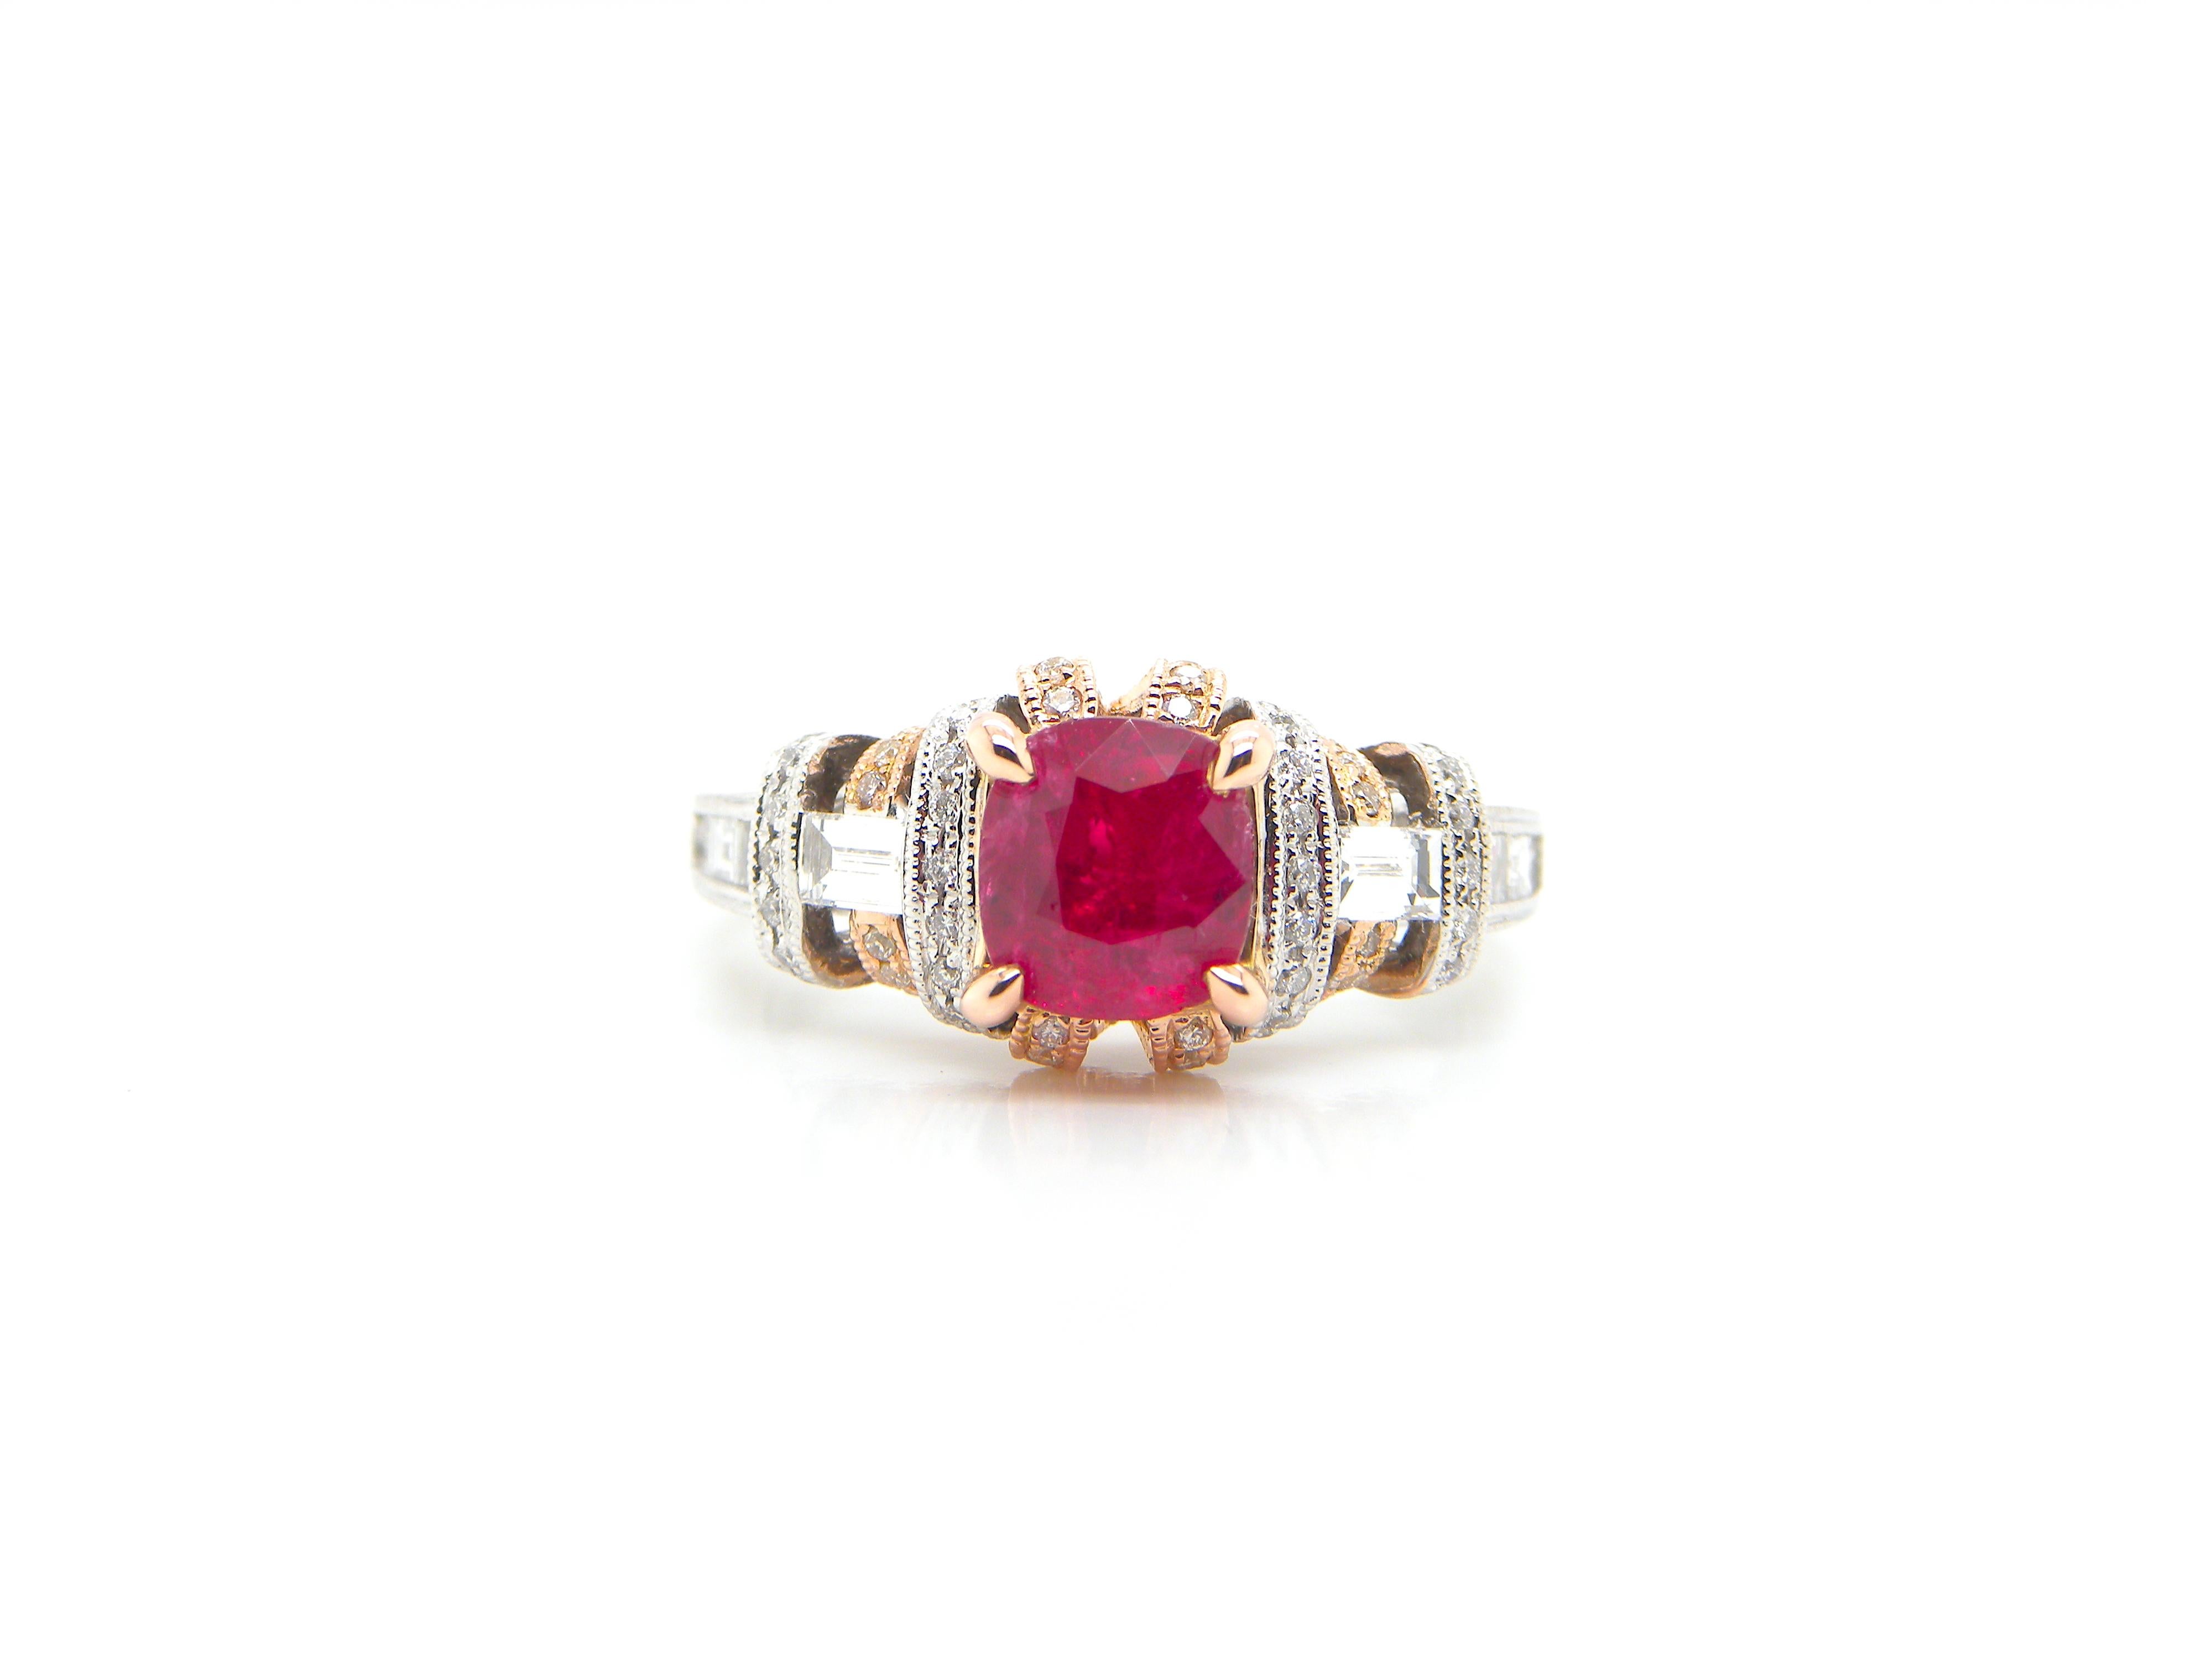 1.53 Carat GIA Certified Burma No Heat Ruby and White Diamond Two-Tone Gold Ring:

A rare jewel, it features a beautiful GIA certified Burmese unheated ruby weighing 1.53 carat surrounded by numerous white round-brilliant cut as well as baguette-cut